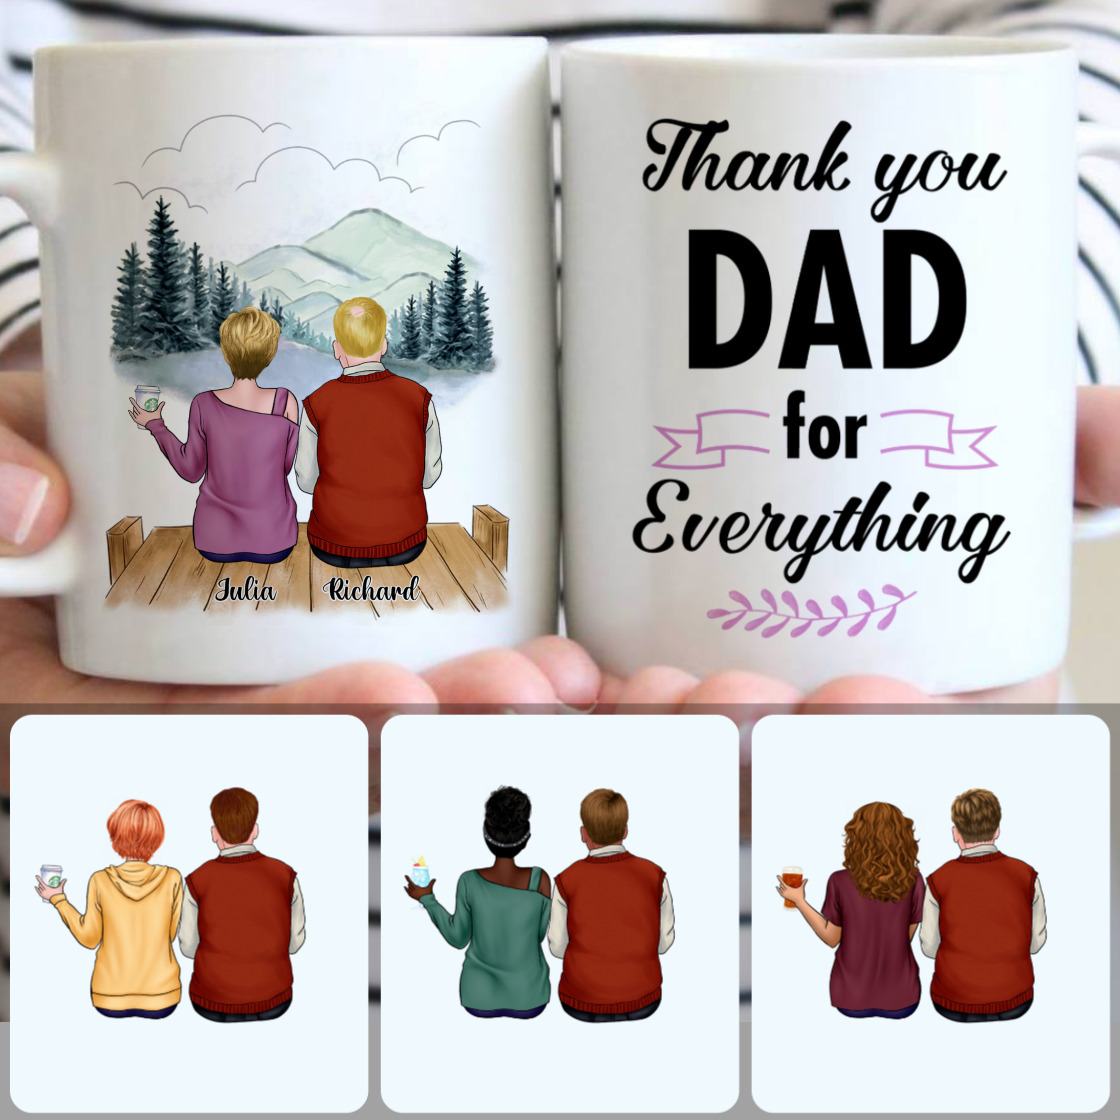 Personalized Mug, Memorial Gifts For Daughters, Father & Daughter Customized Coffee Mug With Names